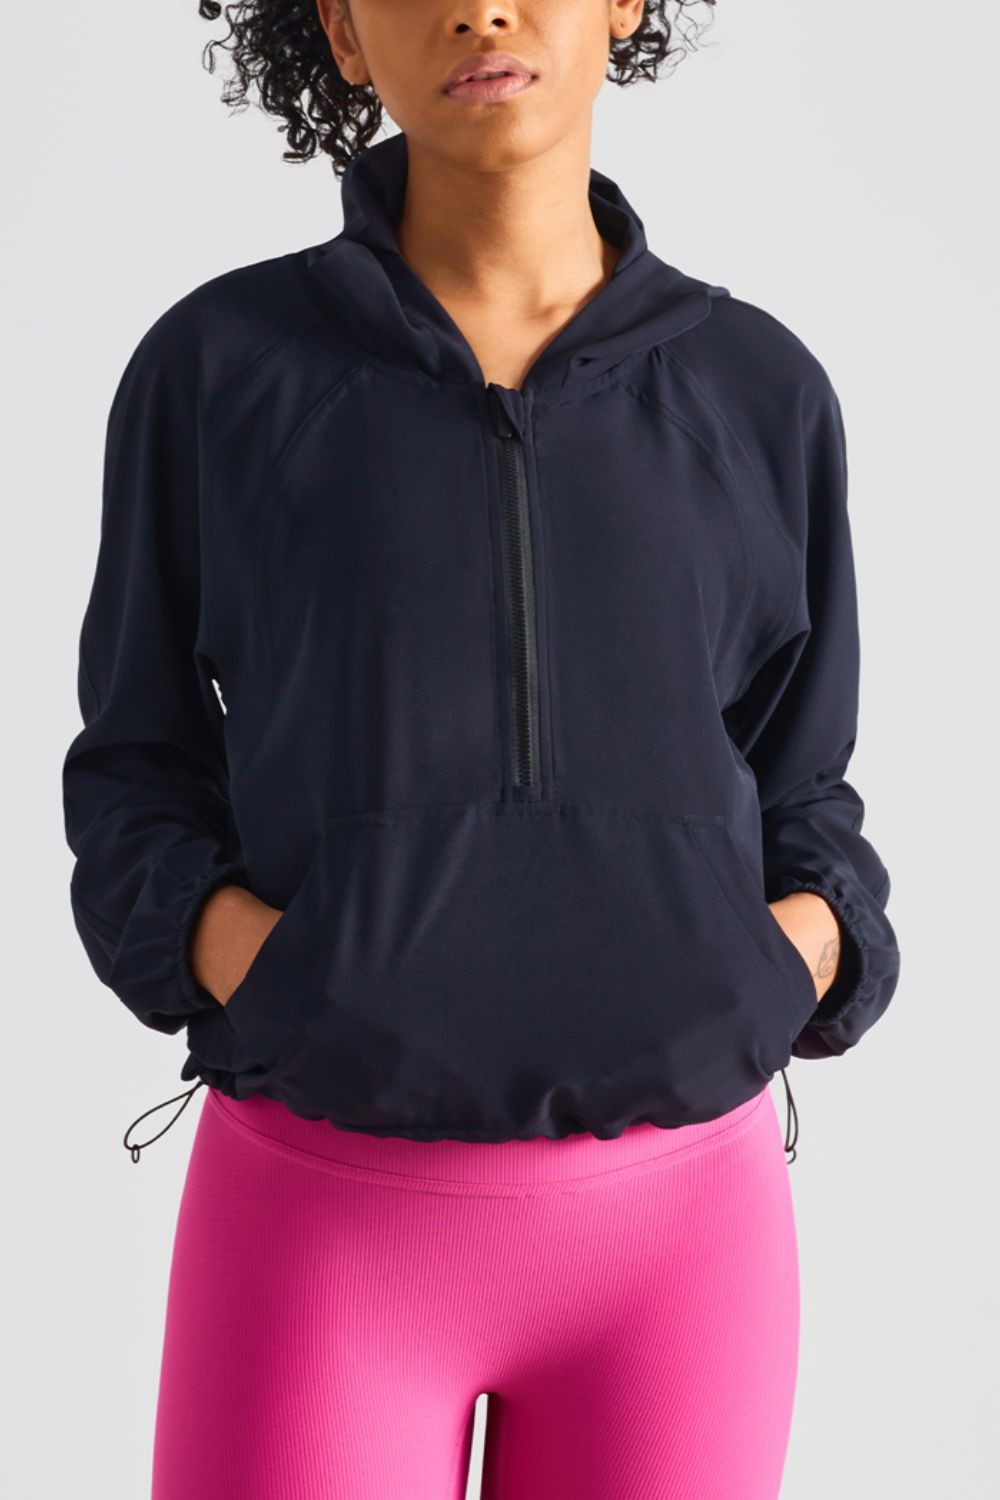 Half-Zip Hooded Sports Top - Cheeky Chic Boutique